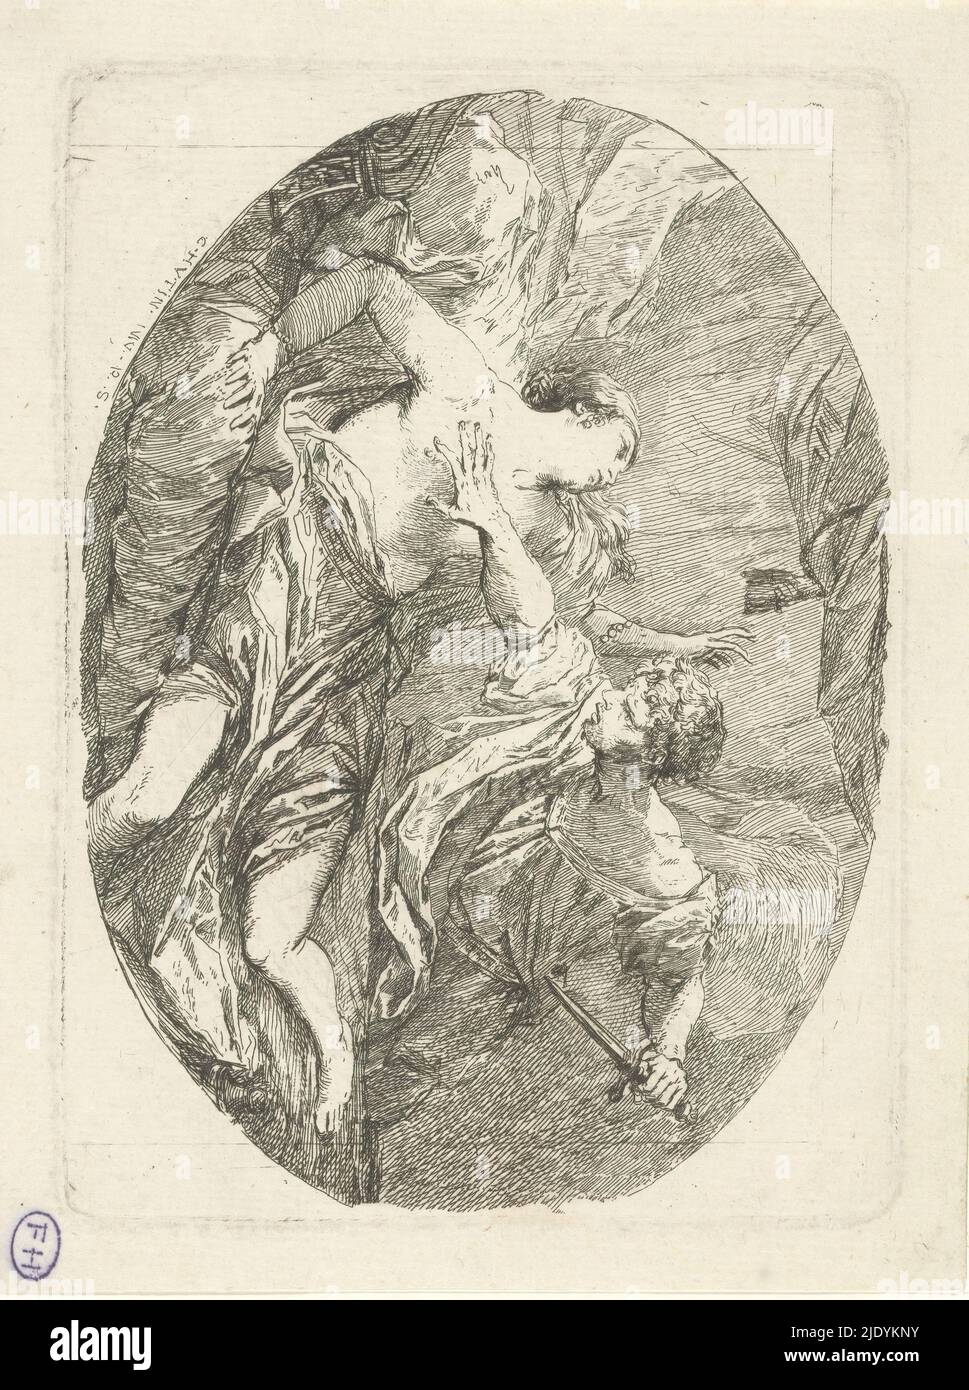 Tarquinius and Lucretia, Tarquinius overwhelms Lucretia lying half-naked on a bed, threatening with a dagger., print maker: Charles François Hutin, (mentioned on object), after own design by: Charles François Hutin, (mentioned on object), Europe, 1763 - 1766, paper, etching, height 123 mm × width 168 mm, height 143 mm × width 190 mm Stock Photo